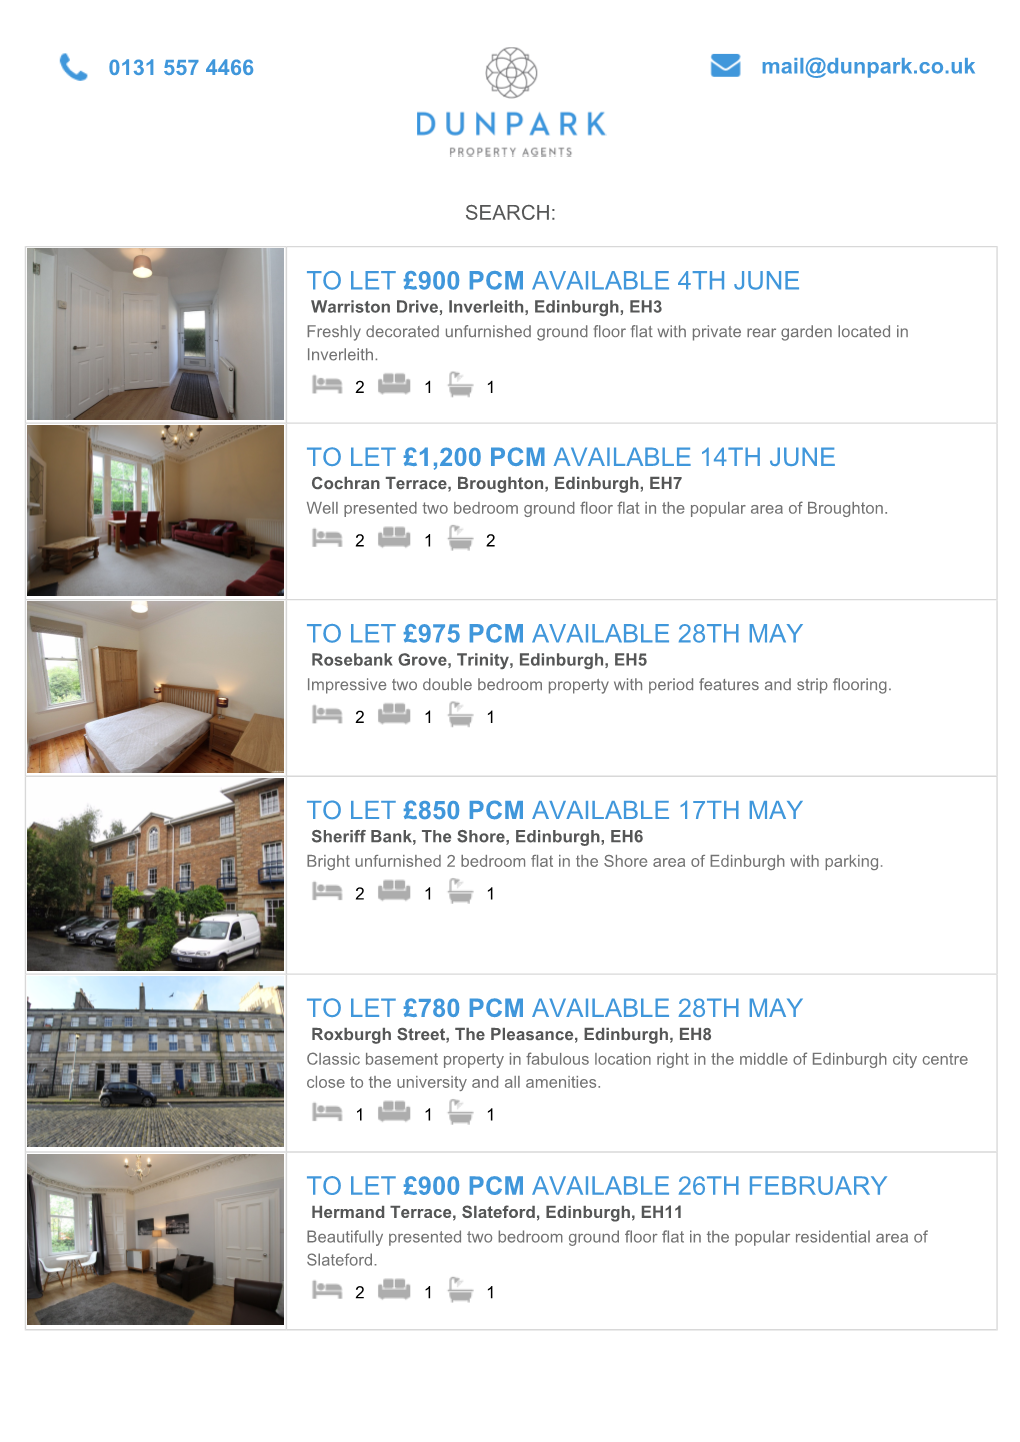 900 PCM AVAILABLE 4TH JUNE Warriston Drive, Inverleith, Edinburgh, EH3 Freshly Decorated Unfurnished Ground Floor Flat with Private Rear Garden Located in Inverleith